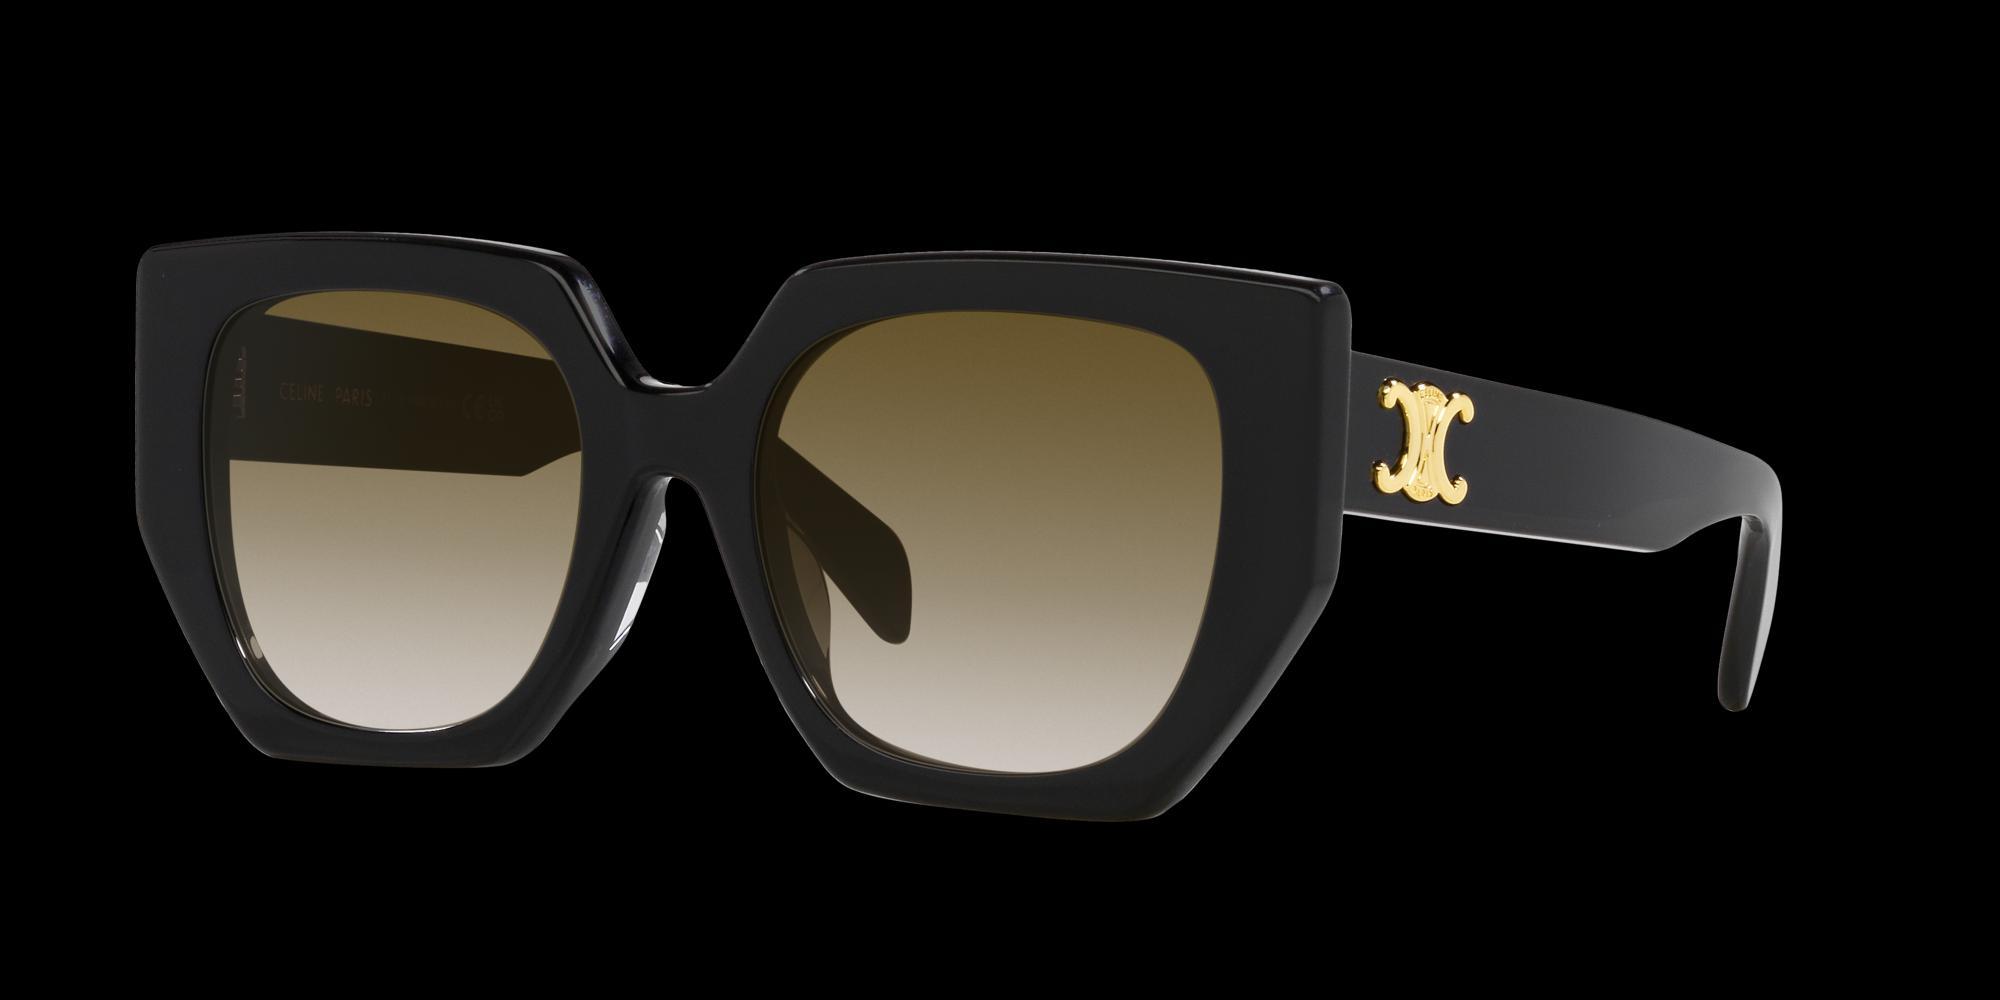 CELINE Triomphe 55mm Butterfly Sunglasses Product Image